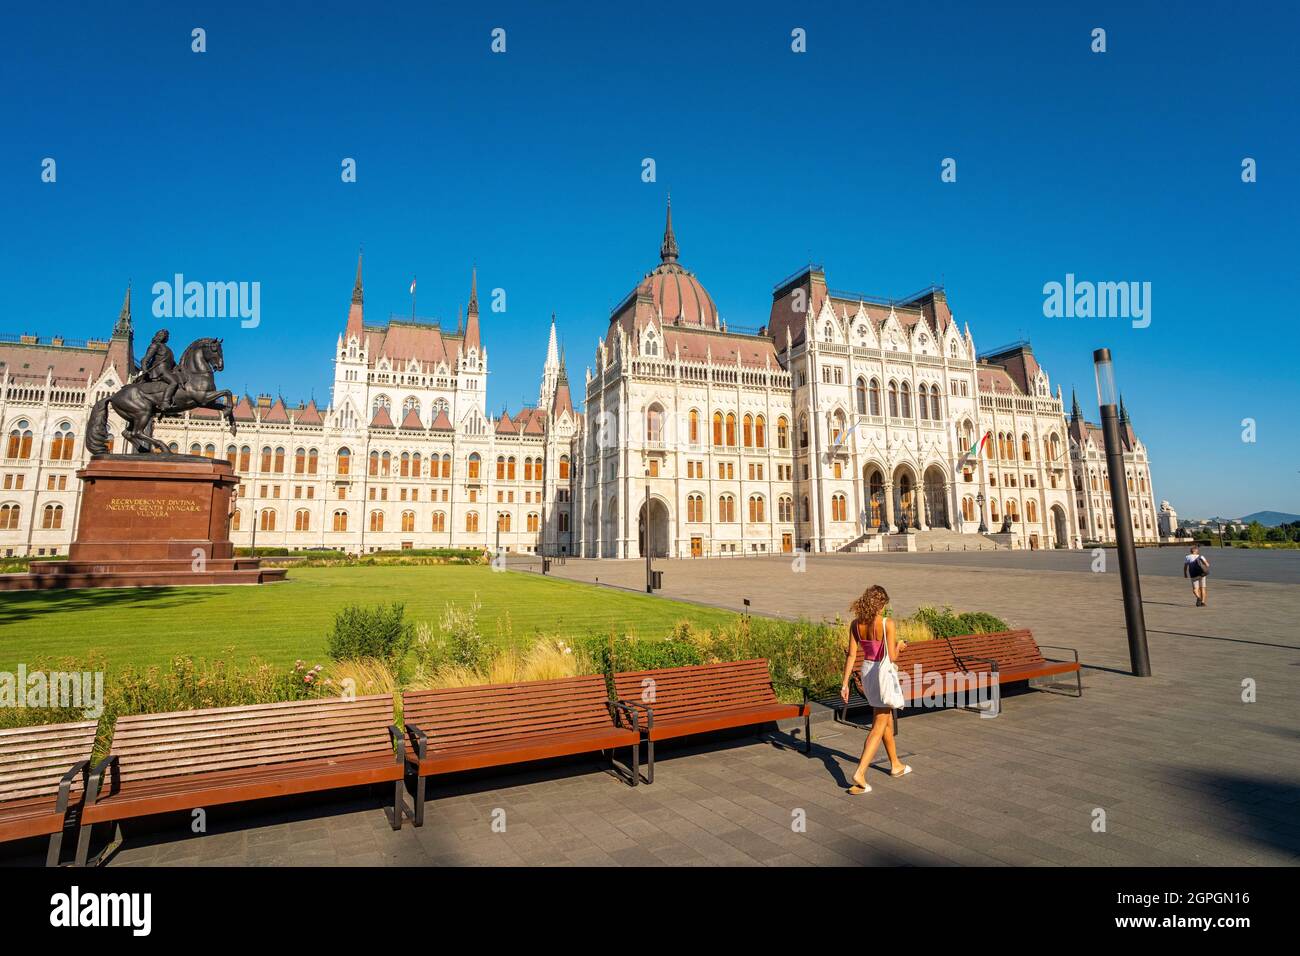 Hungary, Budapest, listed as World Heritage by UNESCO, Pest district, the Hungarian Parliament and the equestrian statue of Rakoczi Ferenc Stock Photo